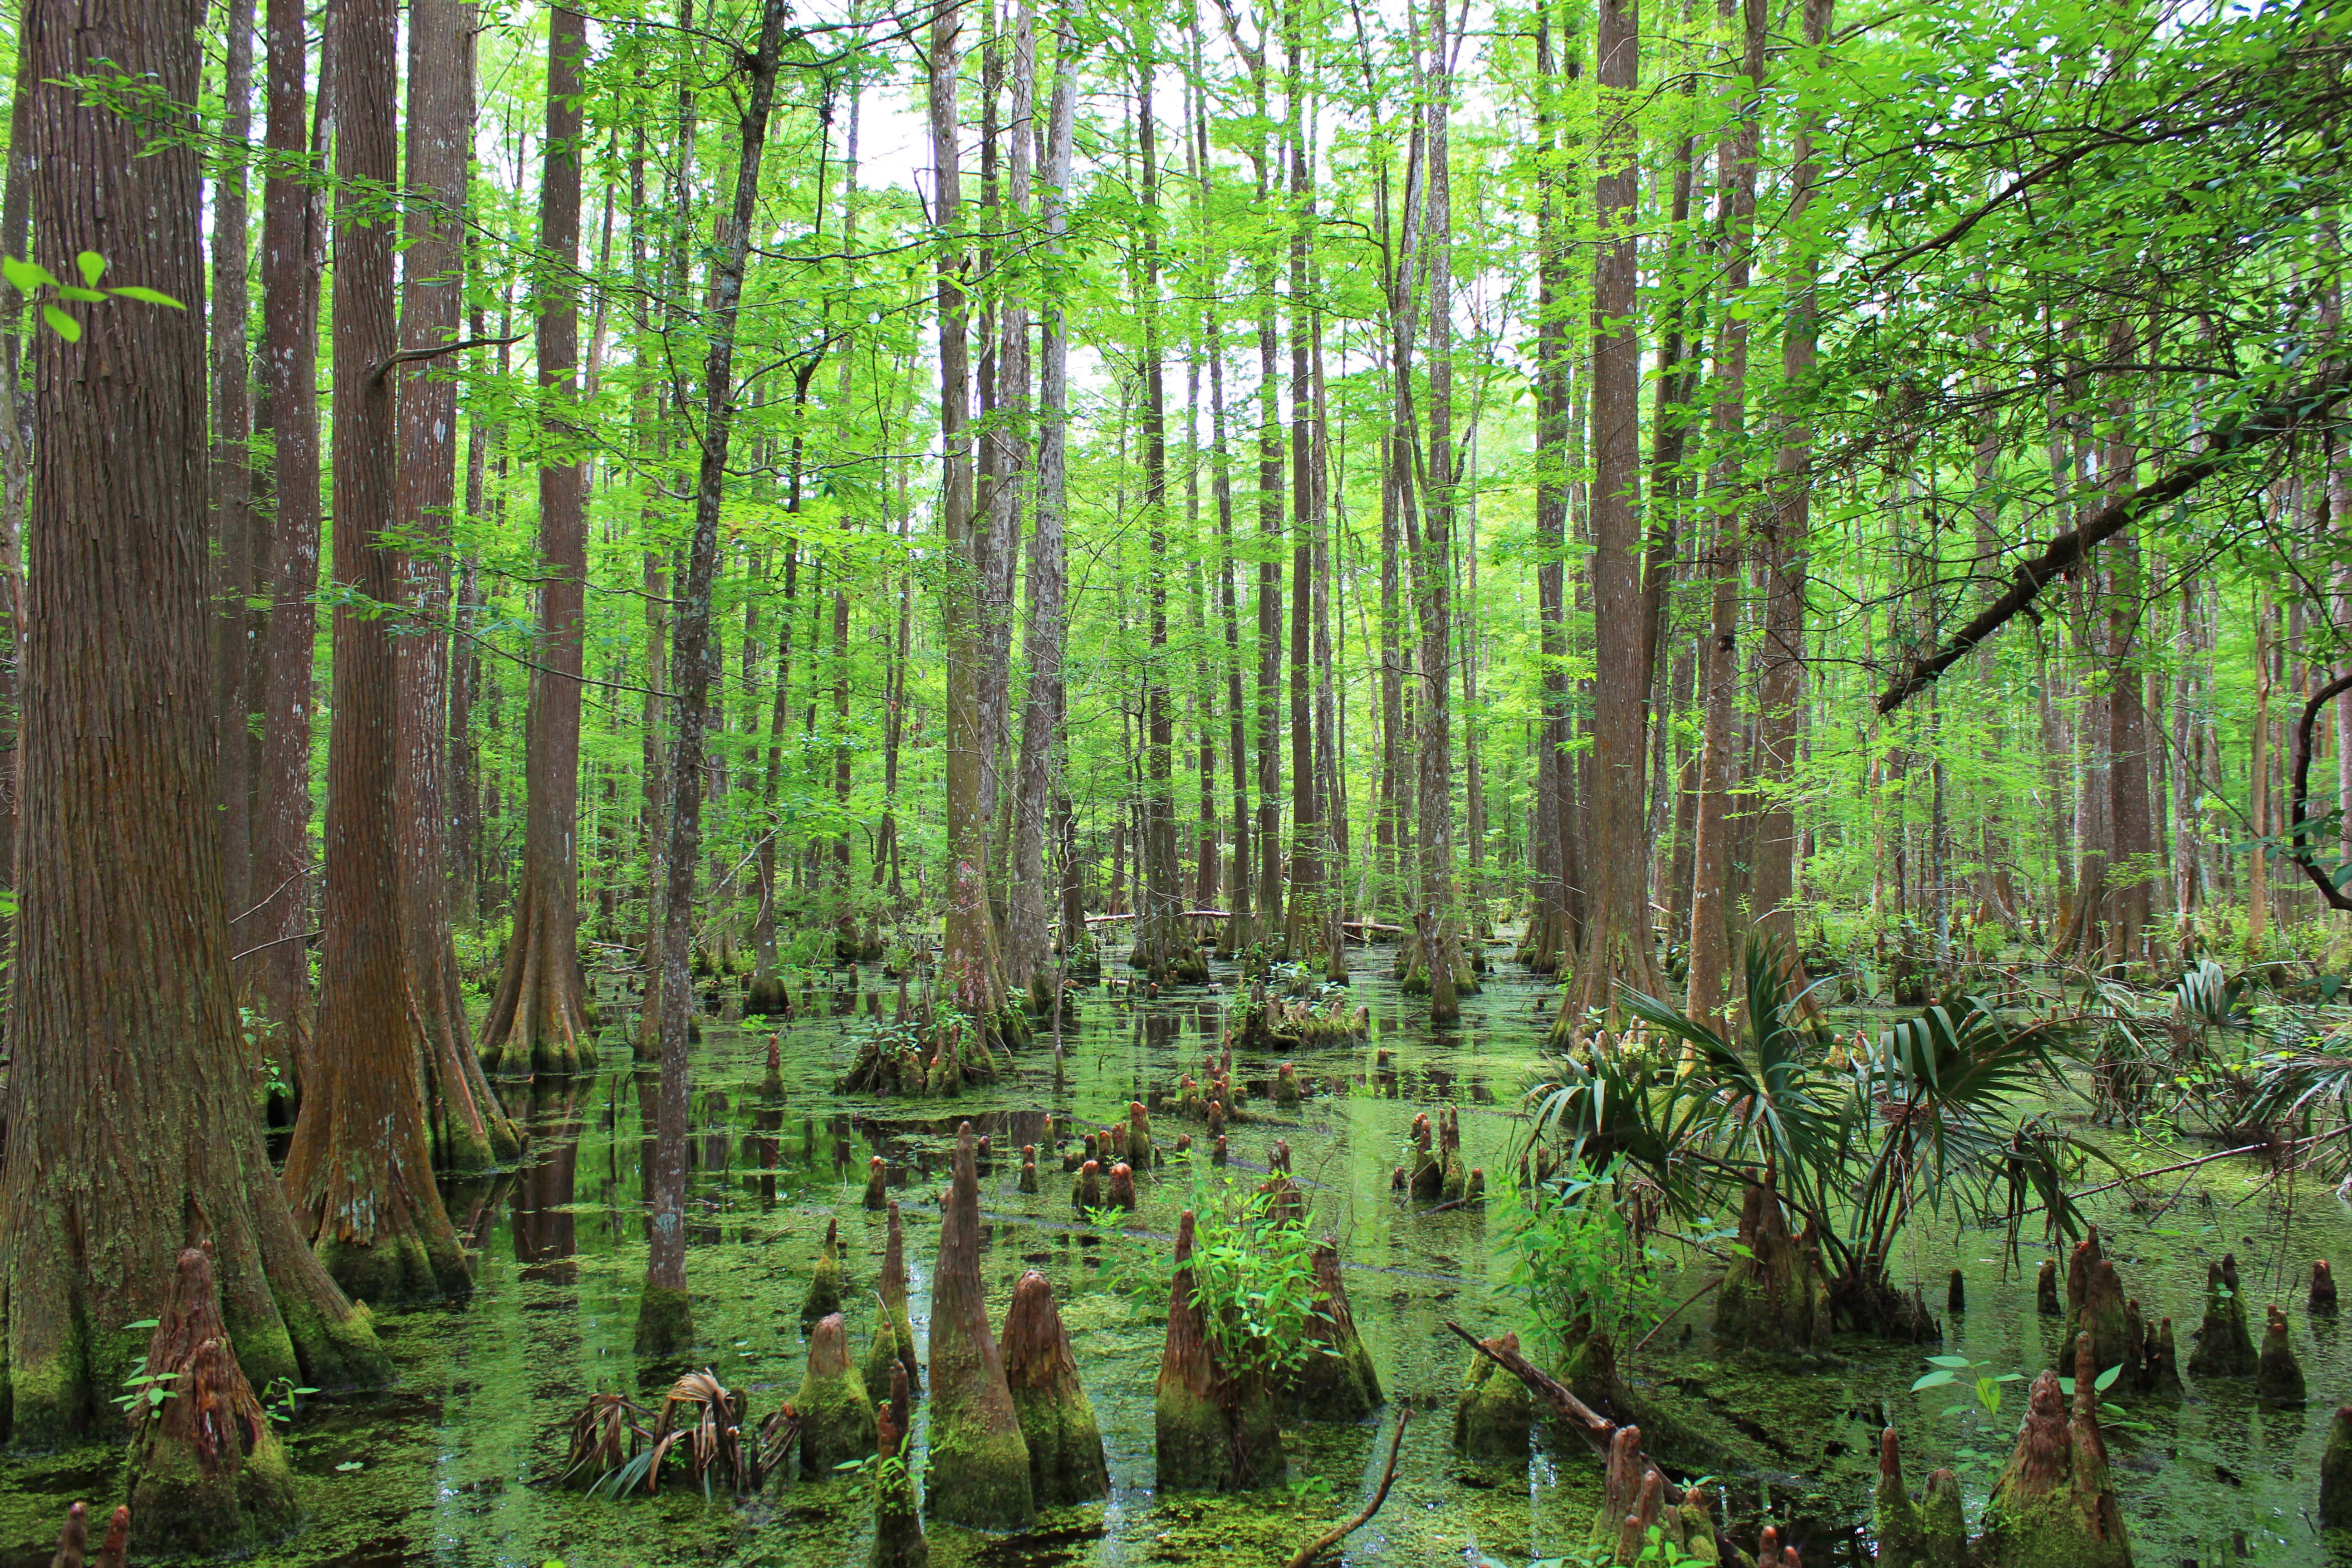 Bright green swamp with shallow water and many kinds of trees and jungle-like plants.